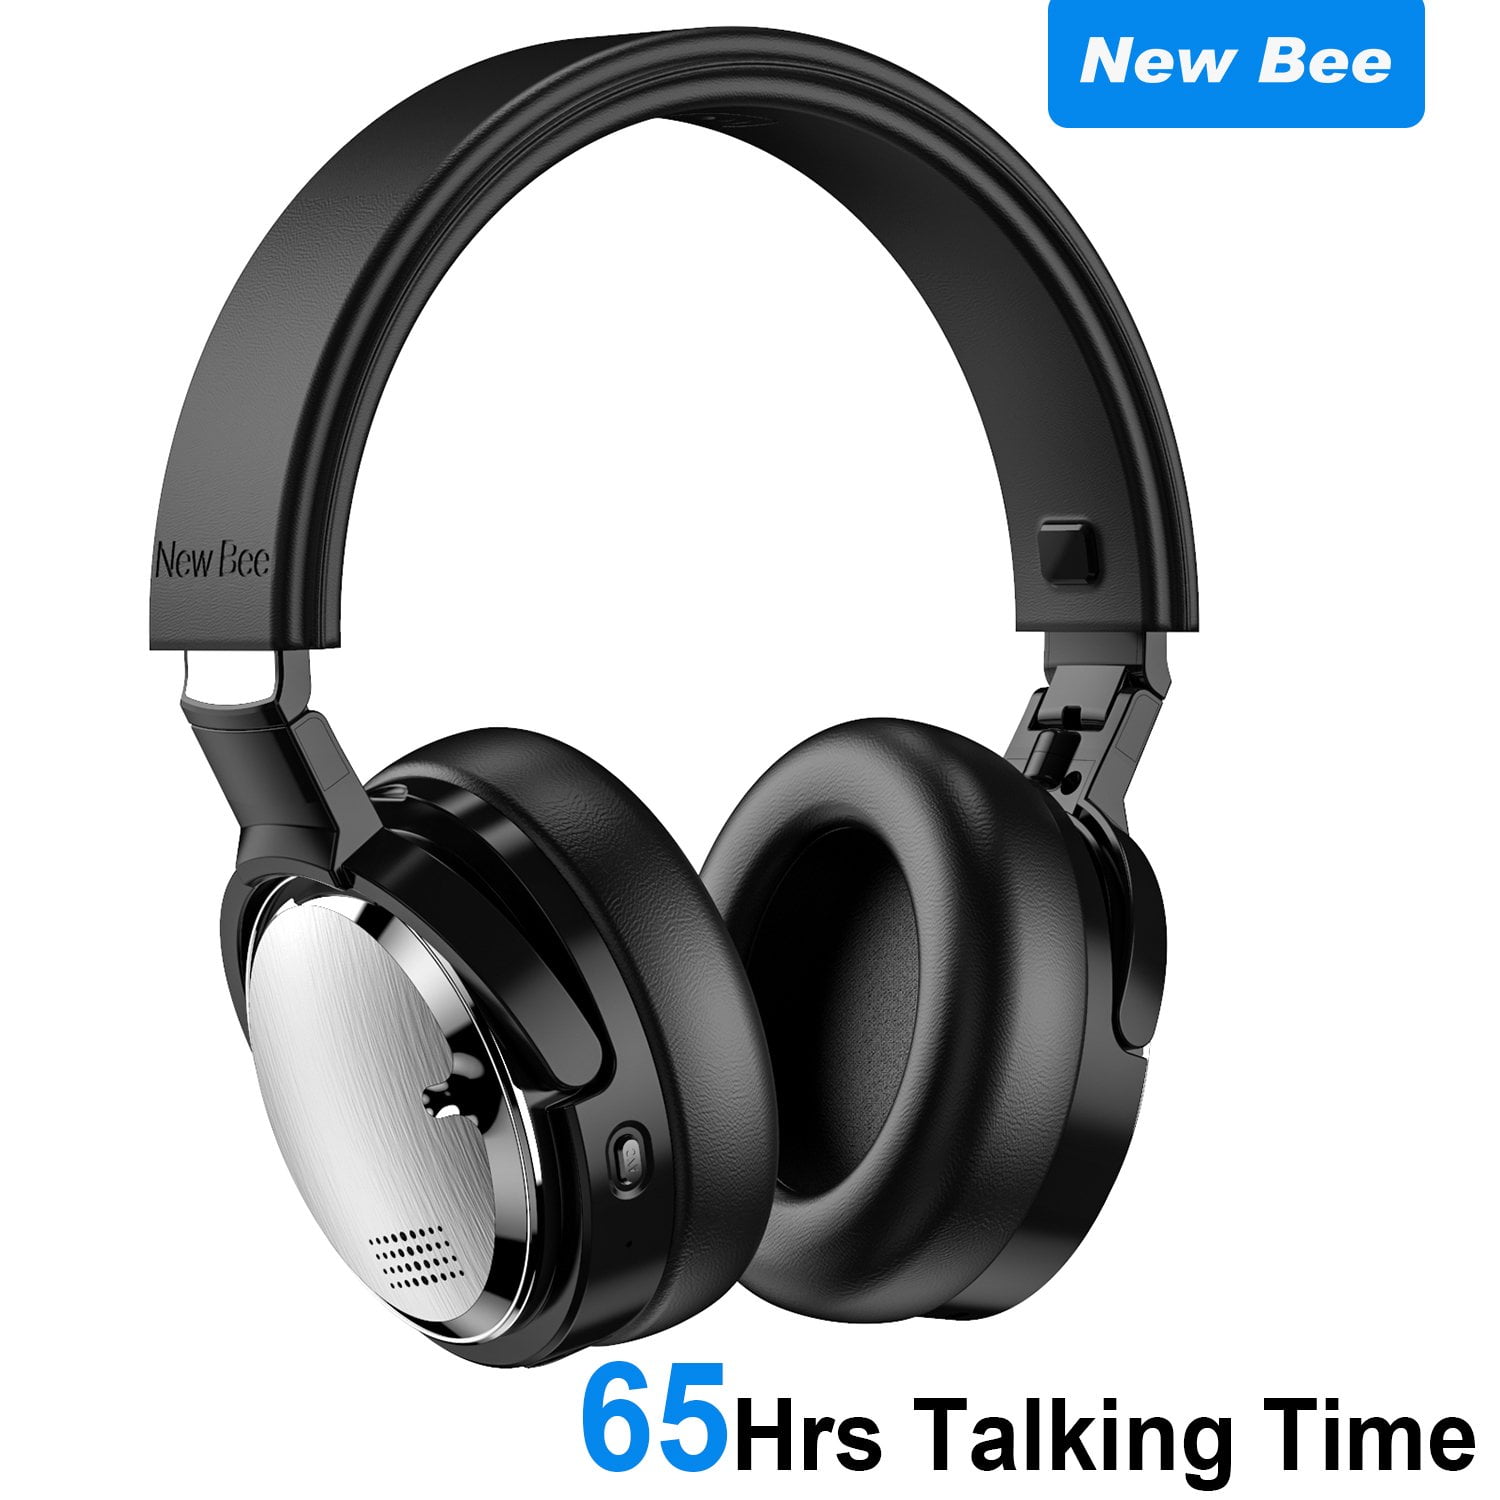 onn. Wireless Over-Ear Headphones with Active Noise Canceling, Black (New)